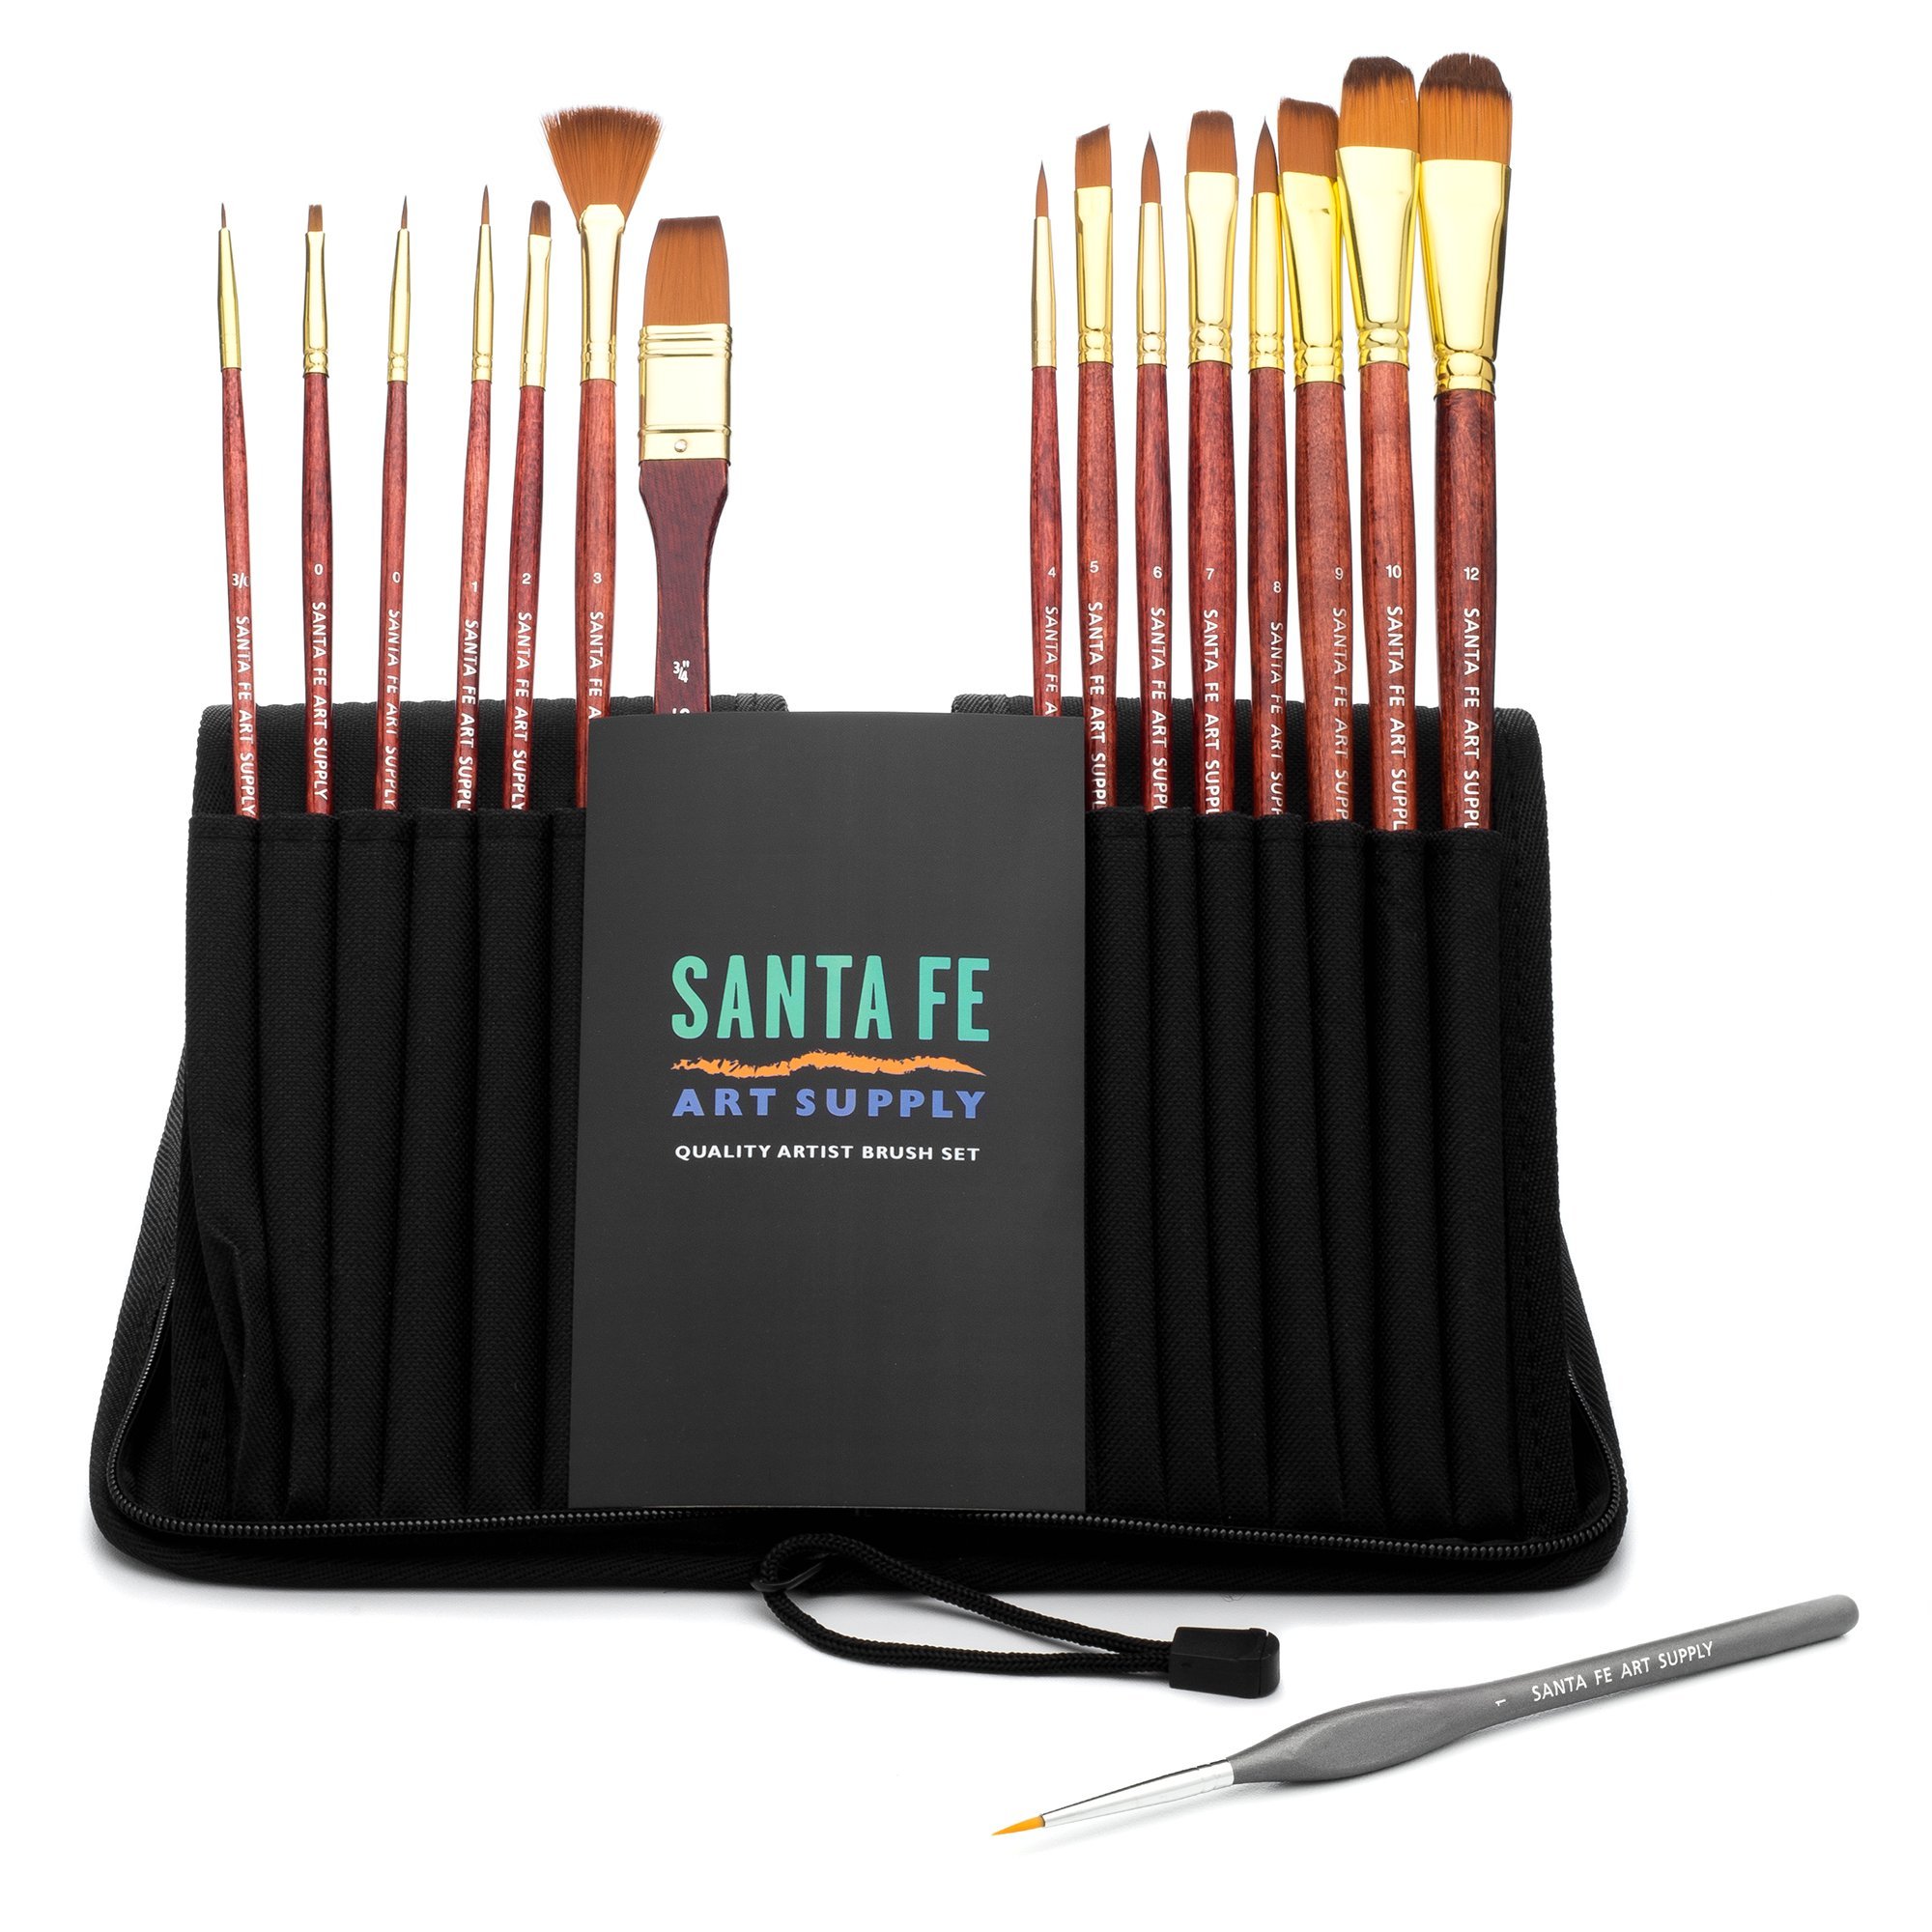 Santa Fe Art Supply Paint Brush Set W/Carrying Case-Organizer - 15+1  Professional Grade Wood Paintbrush Kit Perfect for Watercolor, Oil, Ink,  Face 